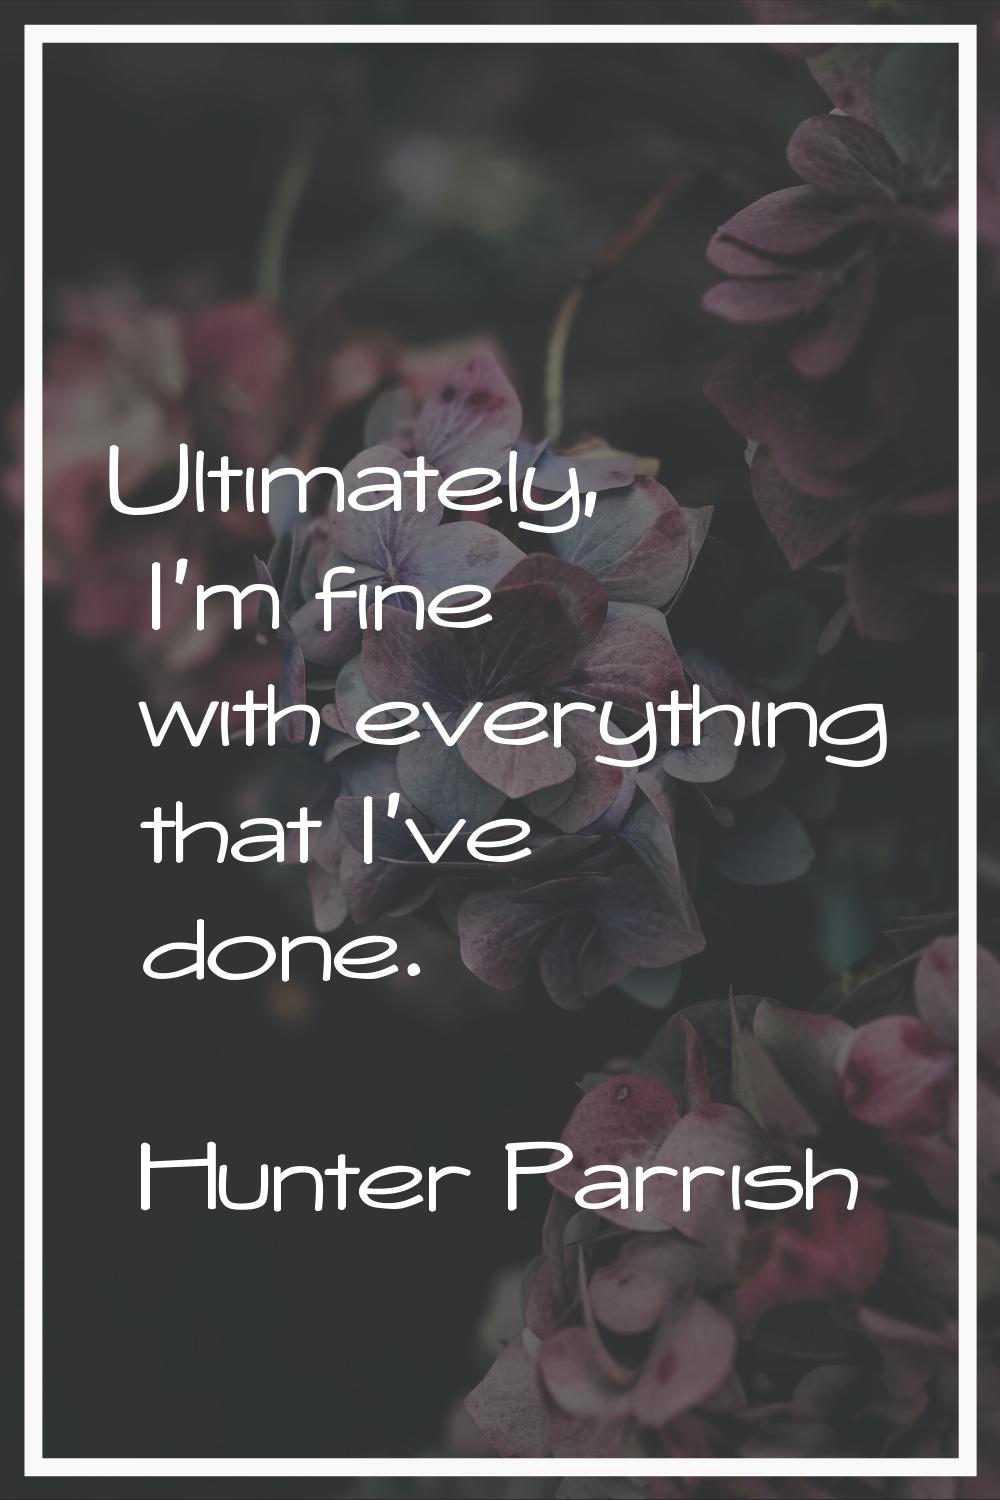 Ultimately, I'm fine with everything that I've done.